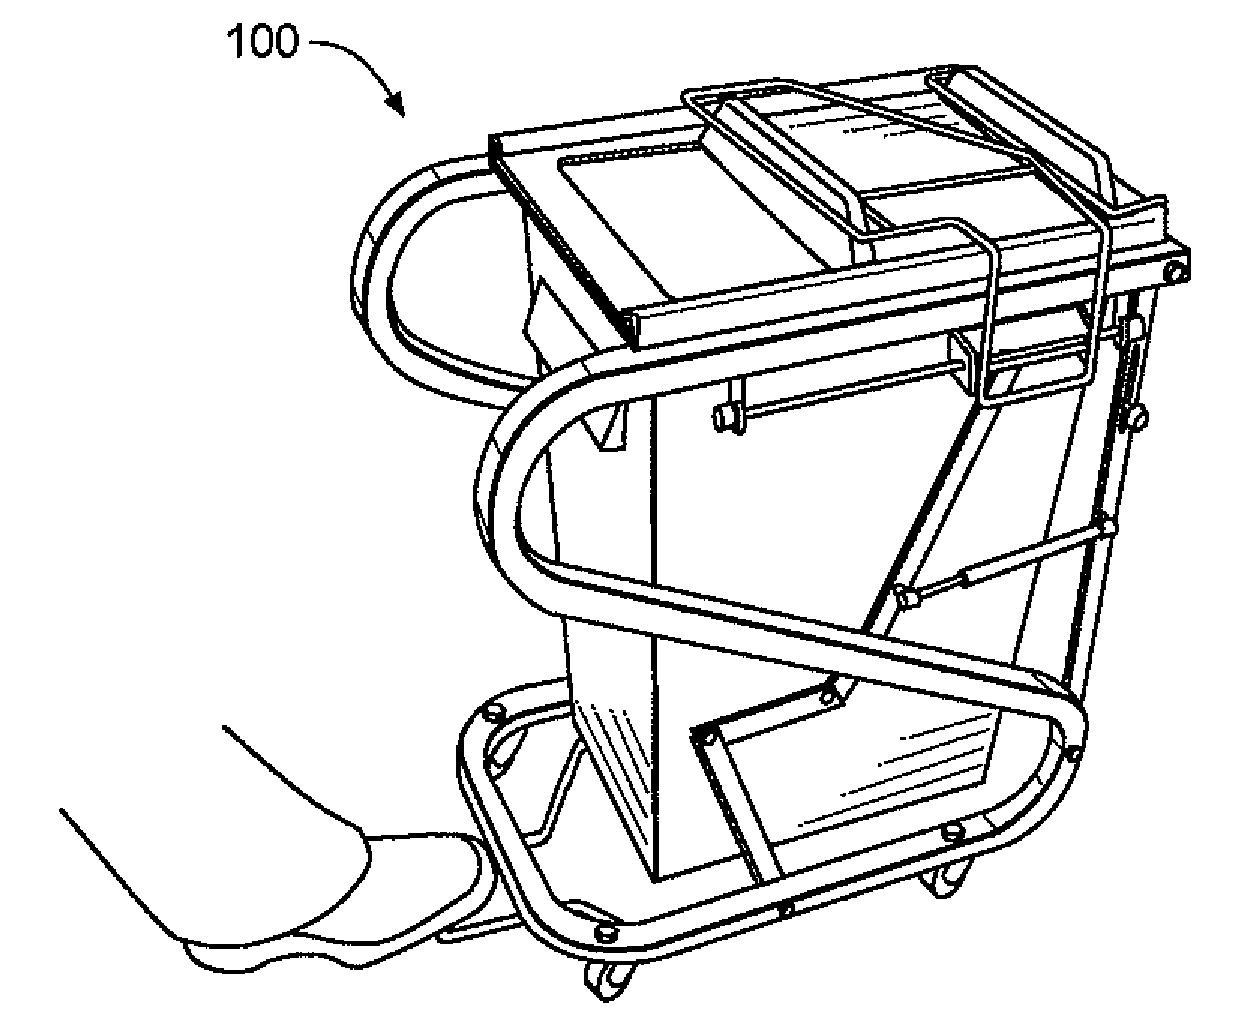 Methods and apparatus for hands-free disposal of medical waste products